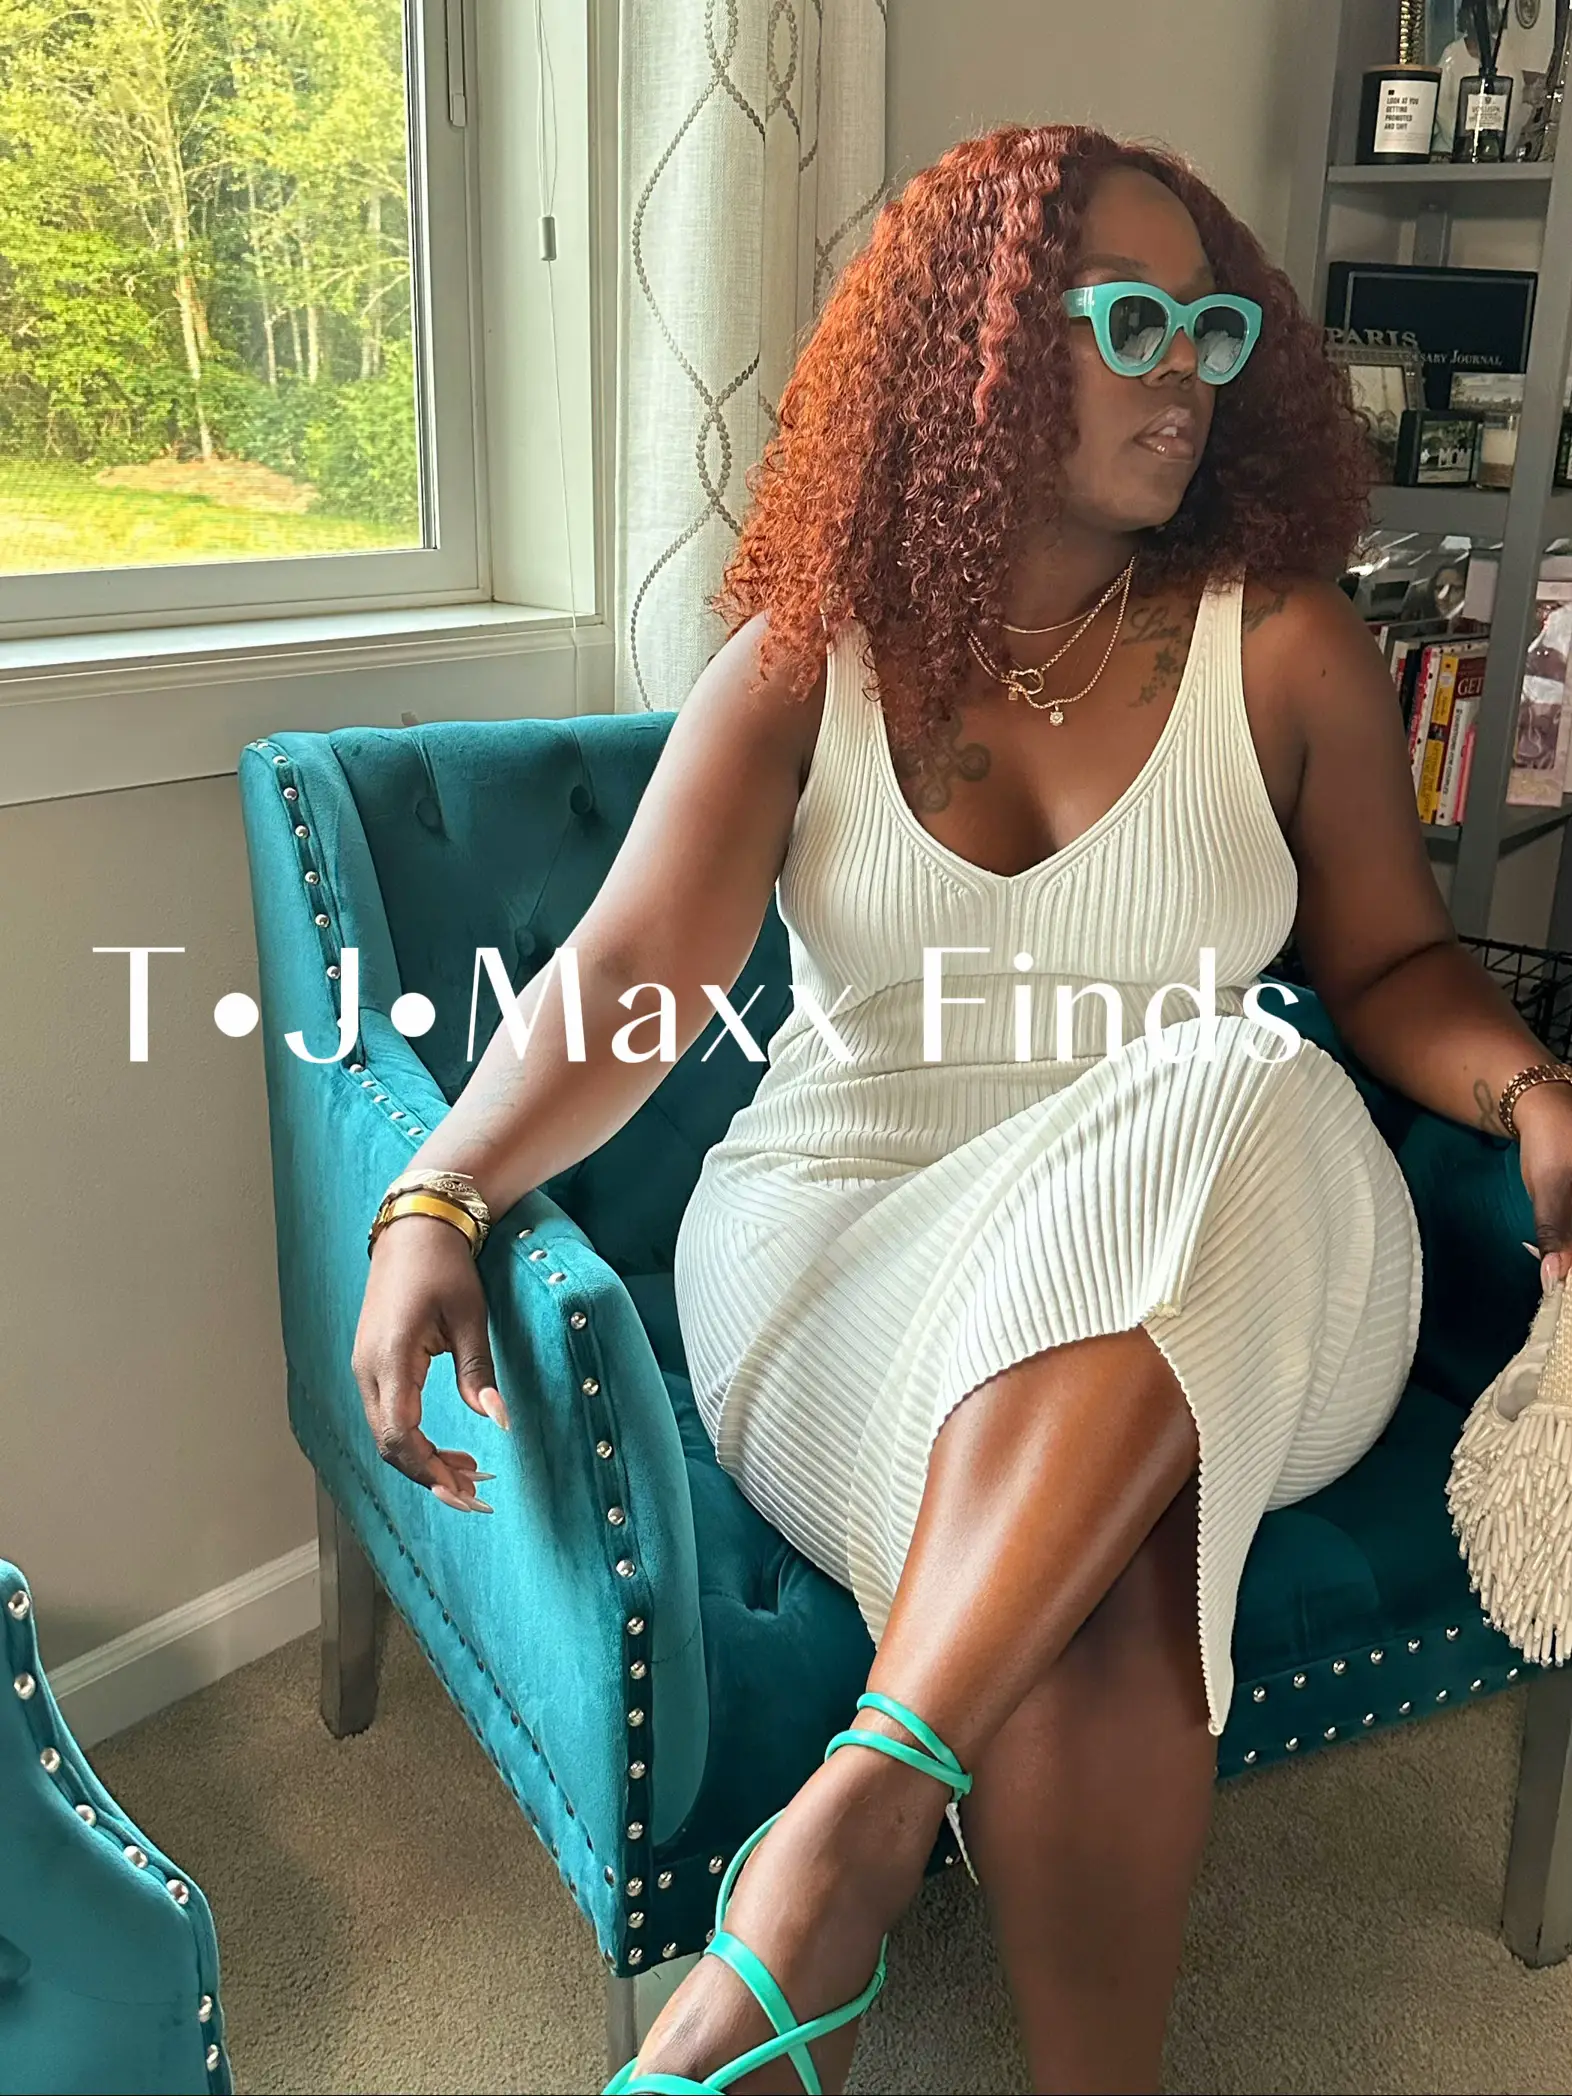 5 Best Summer Clothing from TJ Maxx - Affordable Summer Outfits